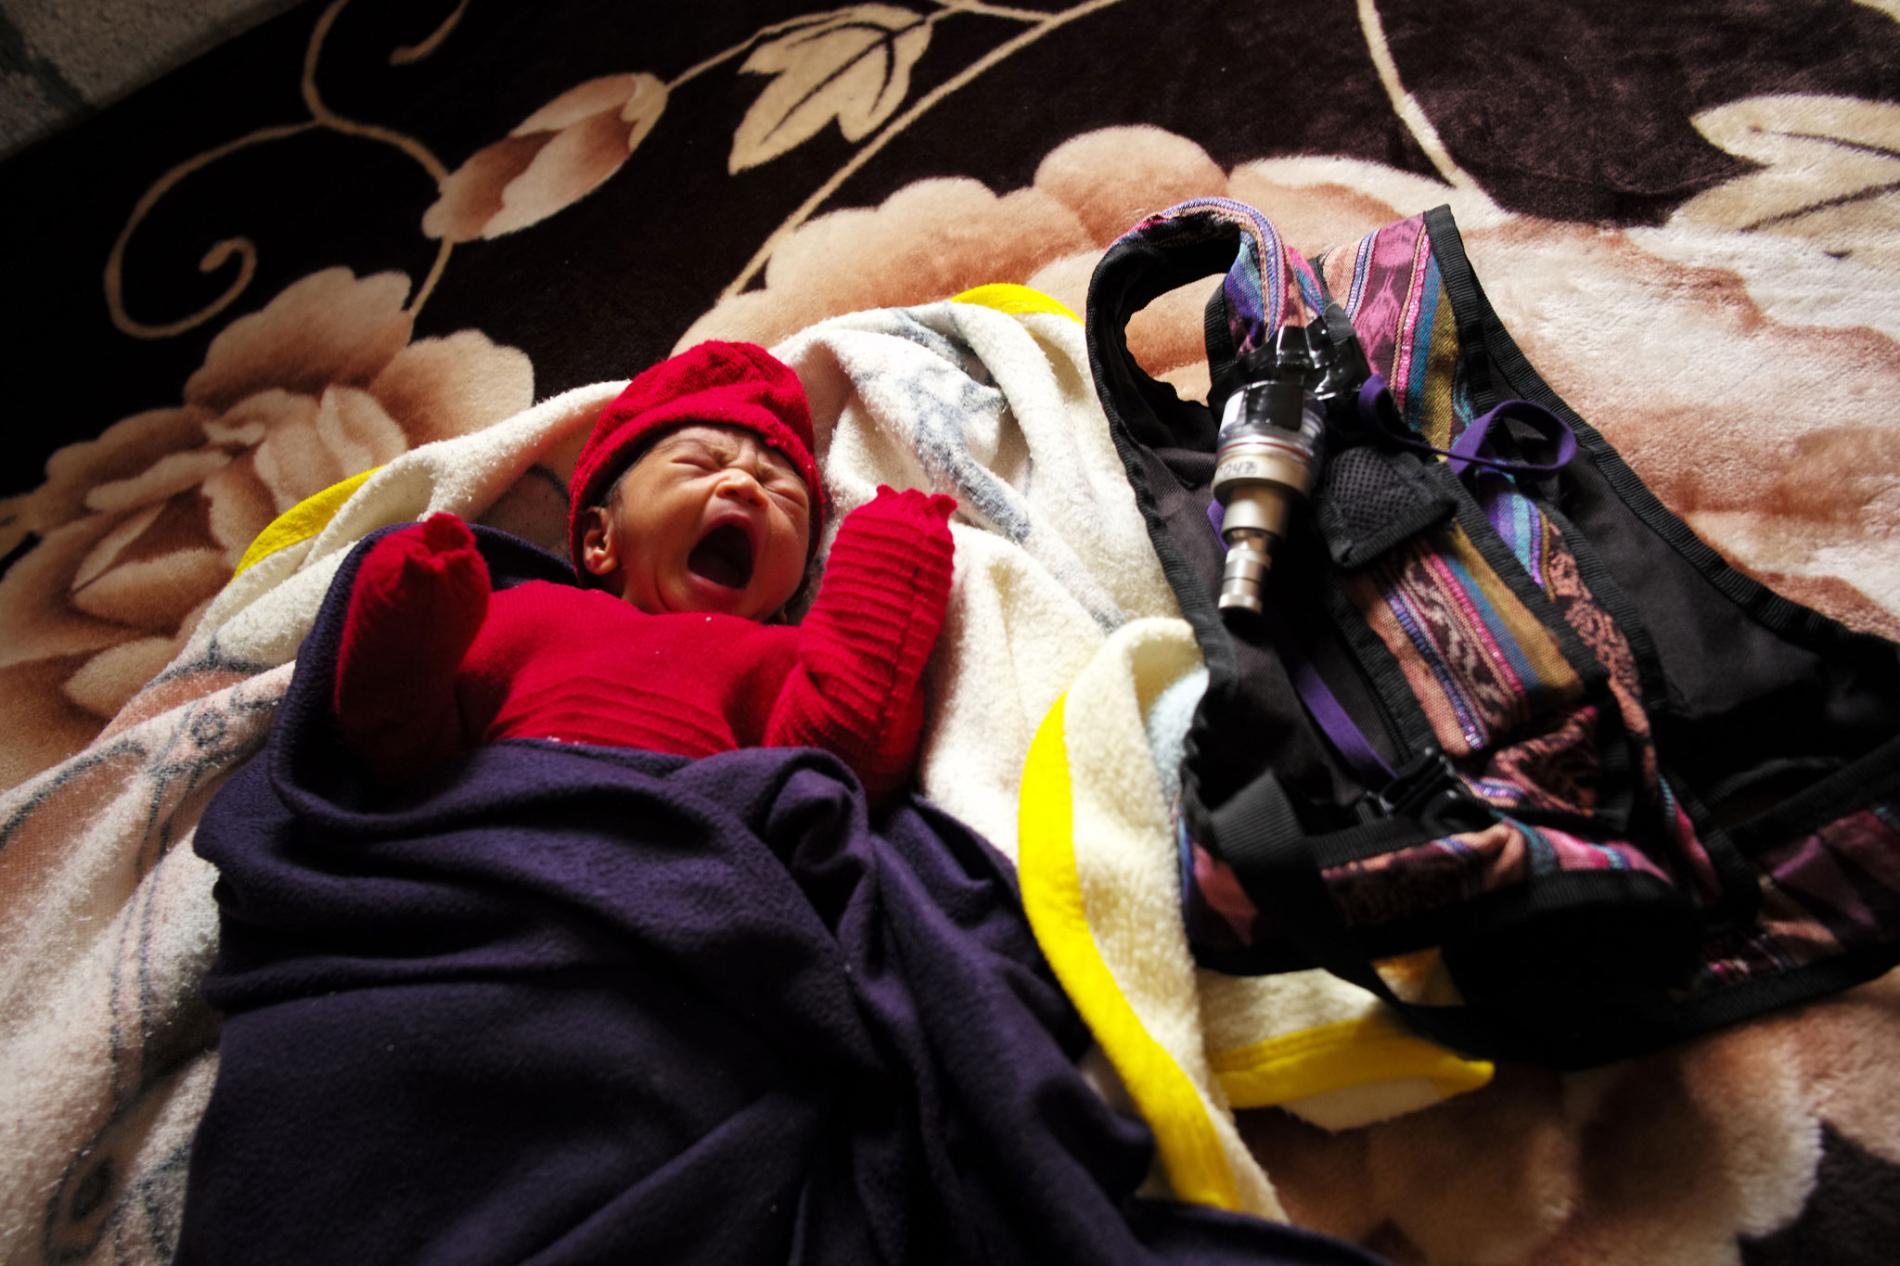 Dina Marroquín’s eight-day-old baby rests next to a knapsack holding an indoor air monitor—part of a study being done by an international research team to determine whether the use of gas stoves improves air quality and the health of children. Image by Lynn Johnson. Guatemala, 2017.